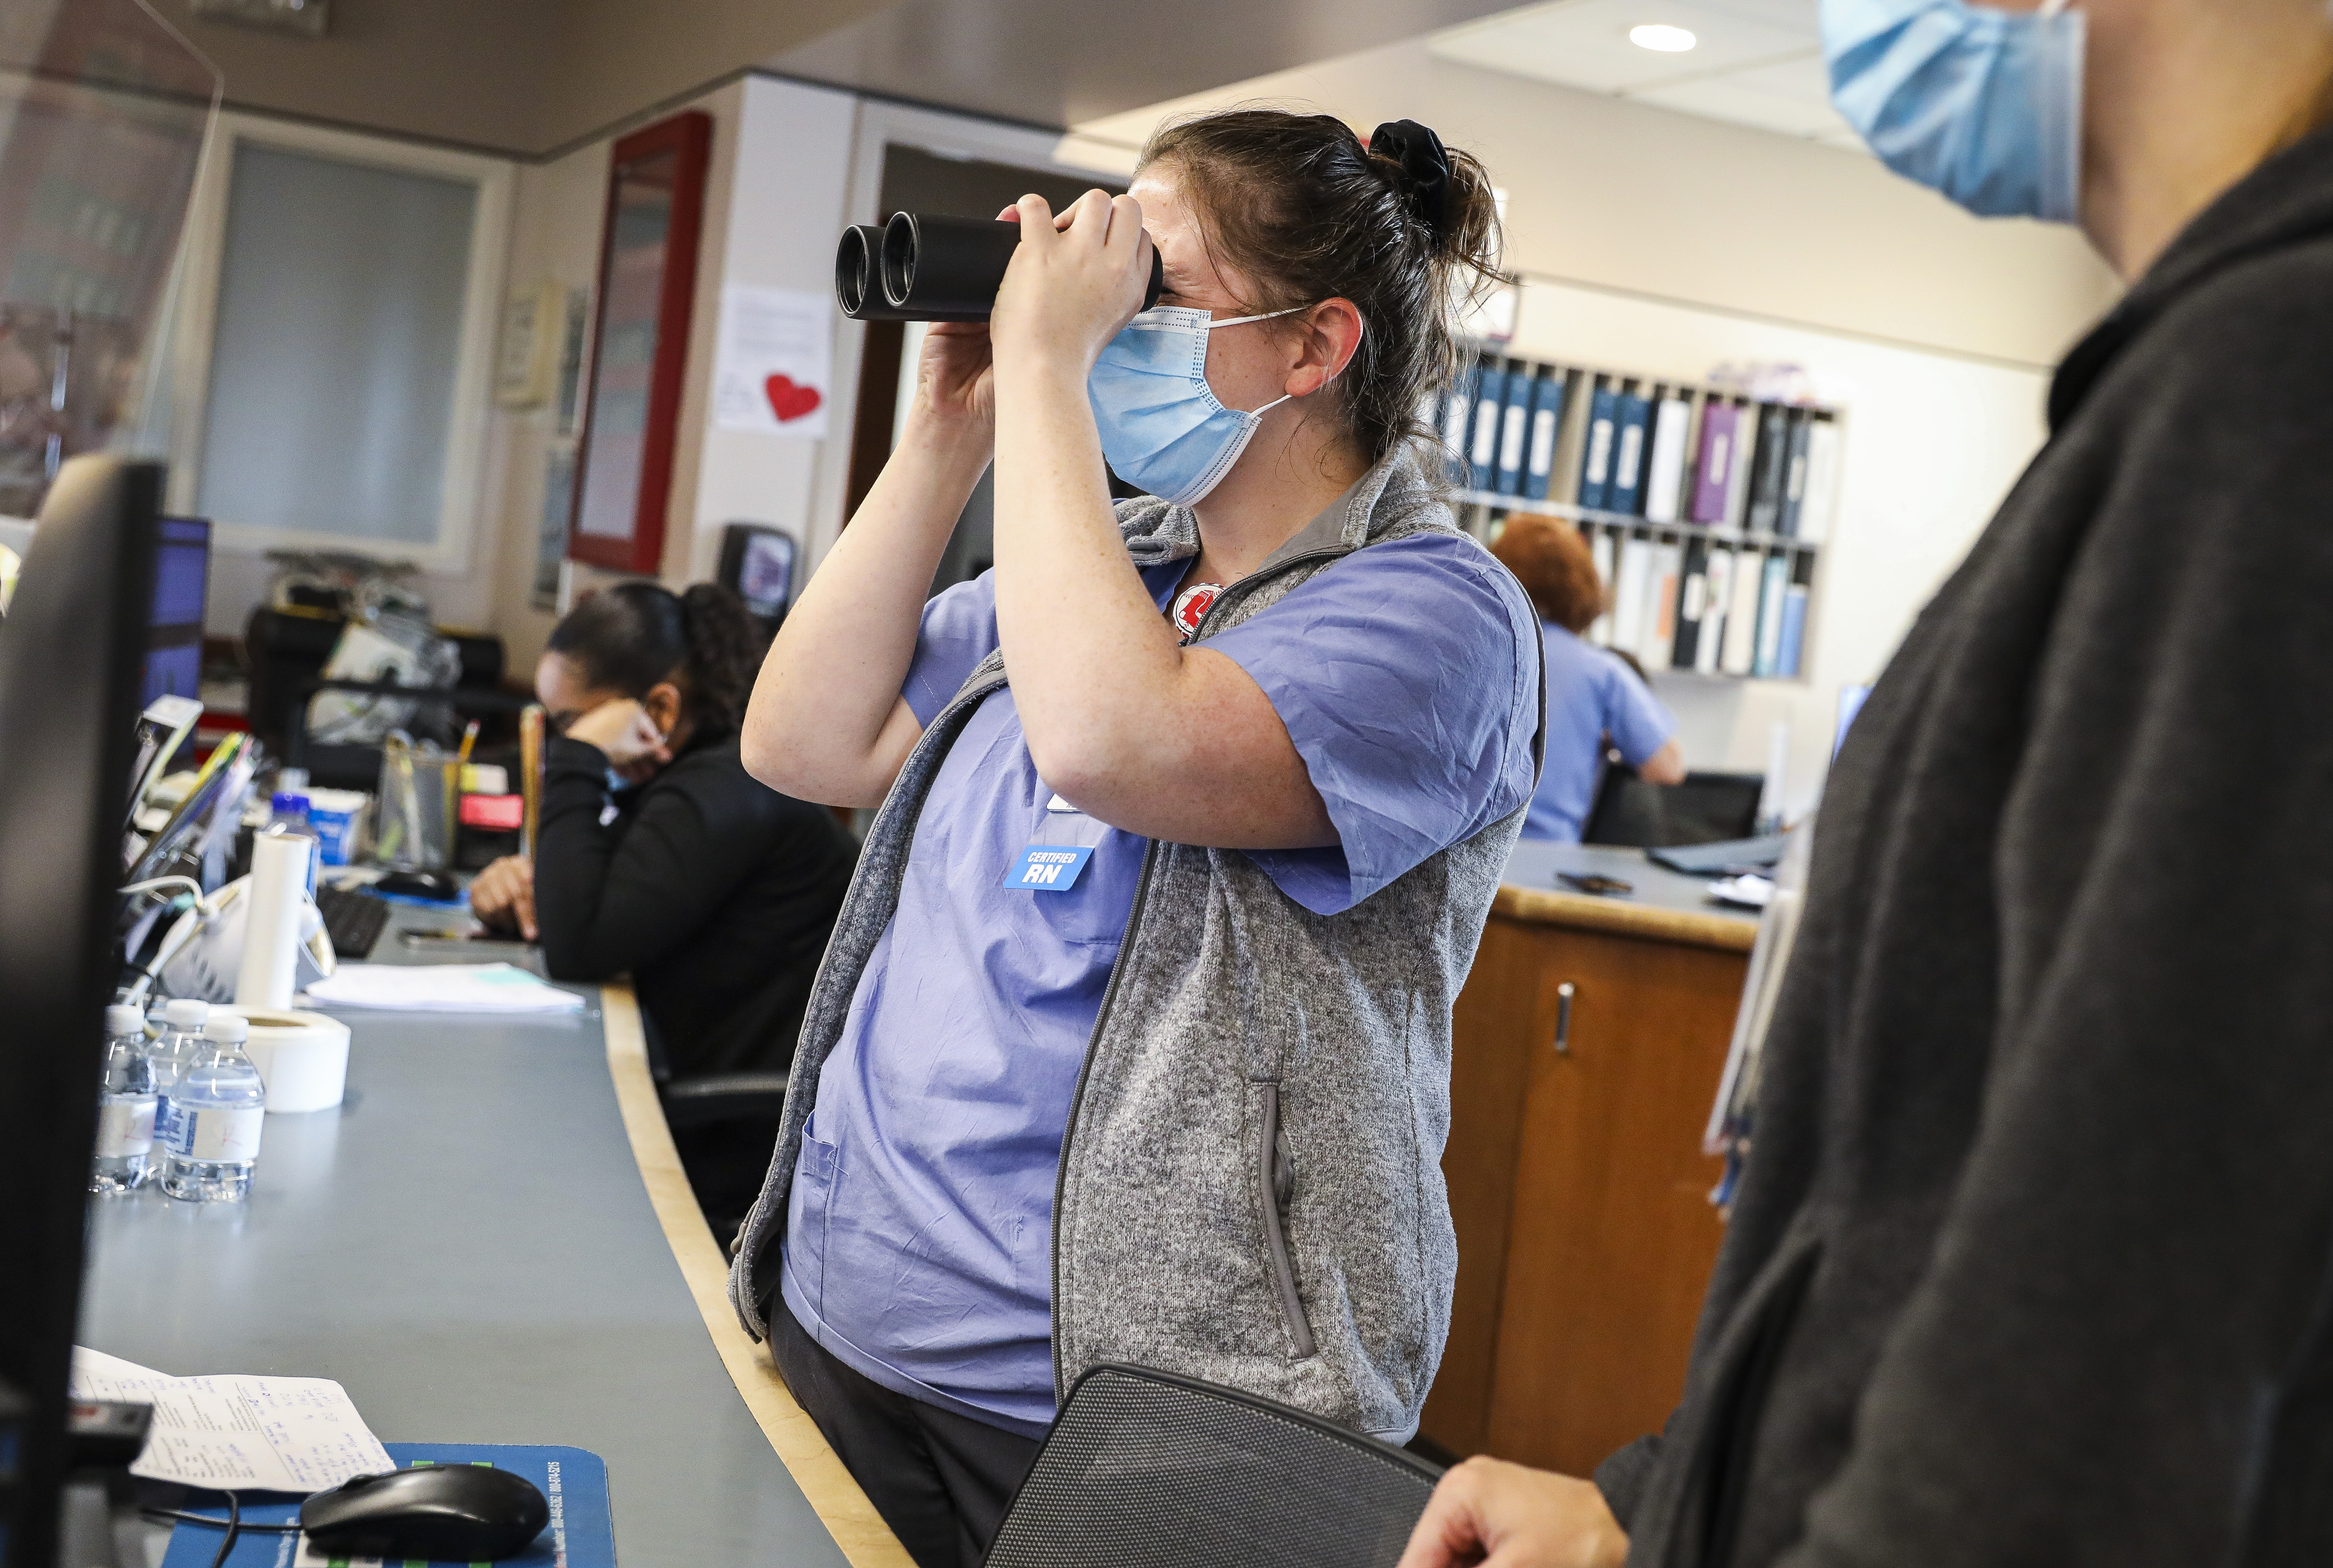 Tufts Medical Center nurse Katey Ring used a pair of binoculars to look through the glass walls of a patient's room while working in the medical intensive care unit.  To limit exposure to COVID-19 and preserve PPE, binoculars were used during the pandemic to assess patient pumps and ventilation settings on the ground. 